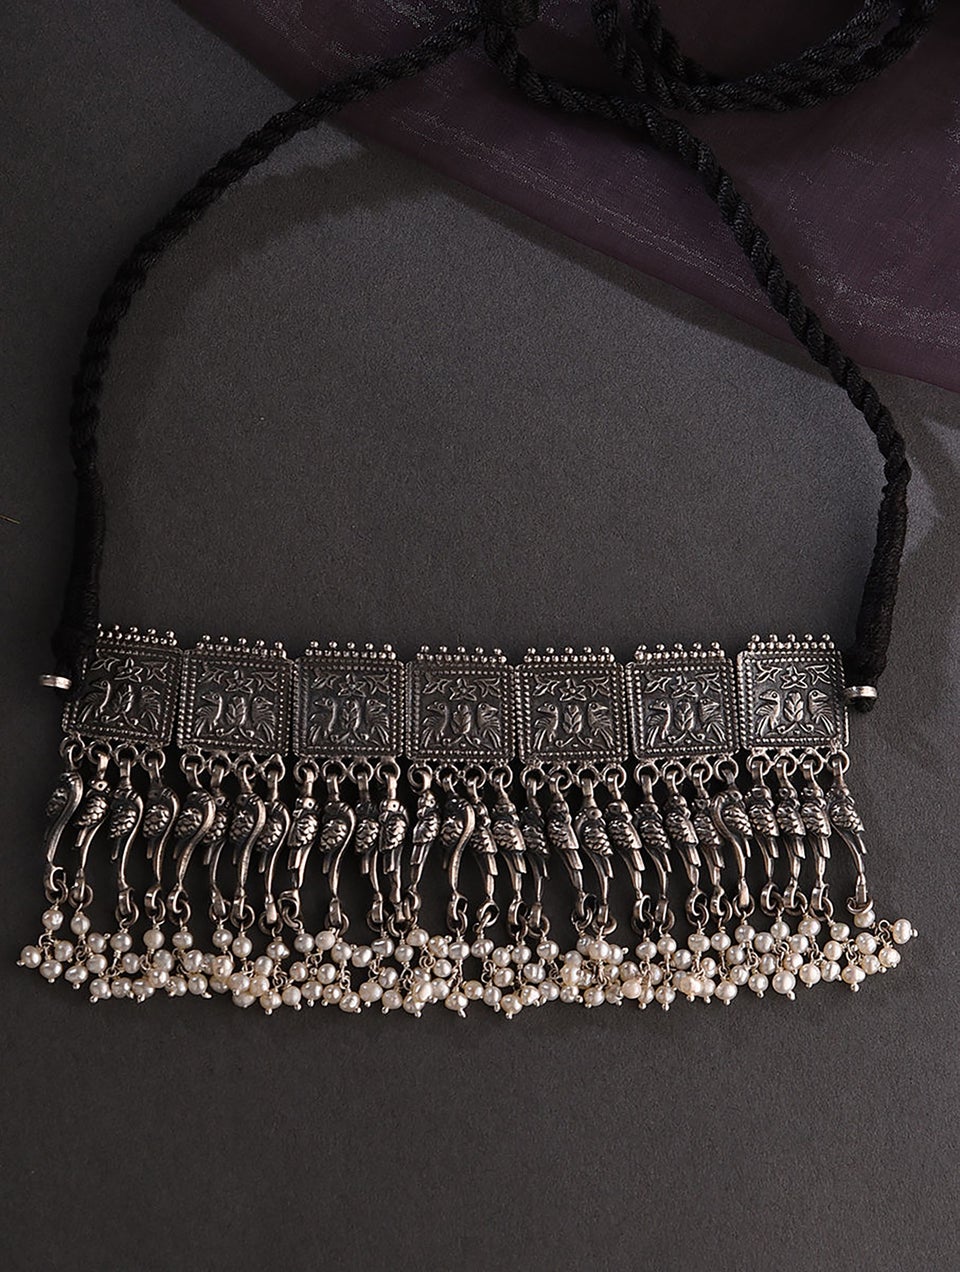 Women Tribal Silver Choker Necklace With Freshwater Pearls